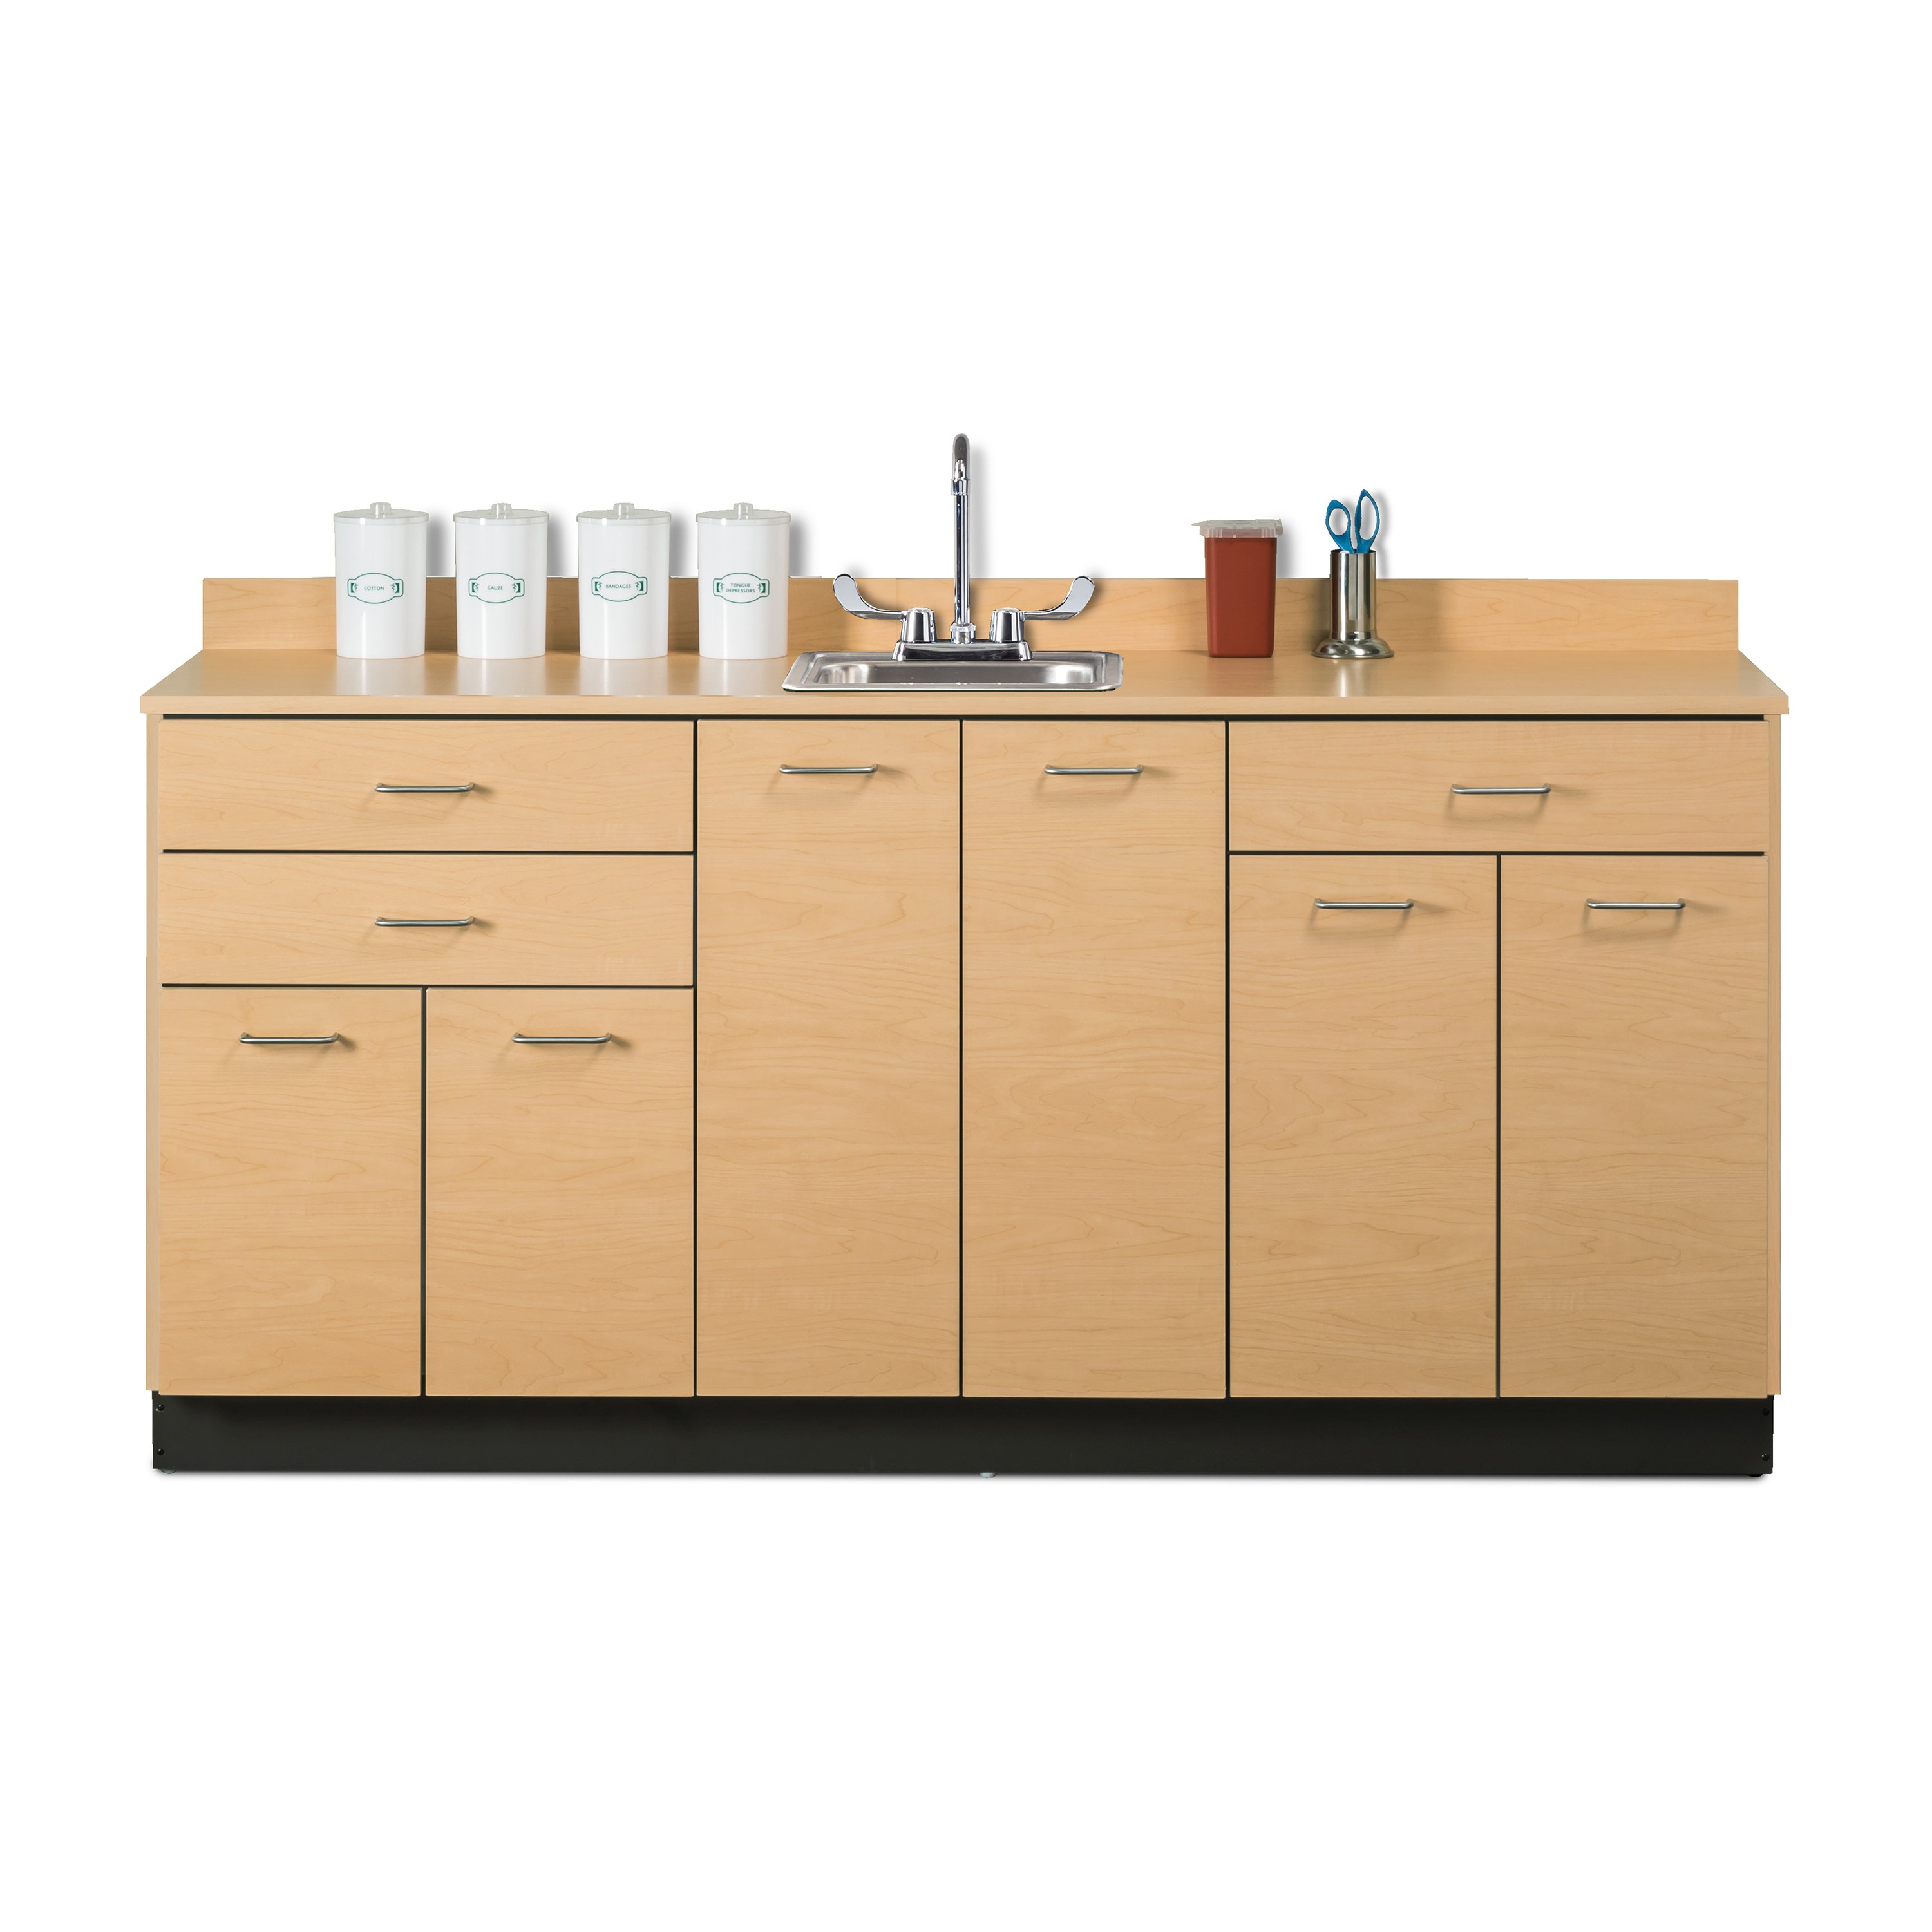 Clinton Industries 8072 Base Cabinet With 6 Doors 3 Drawers